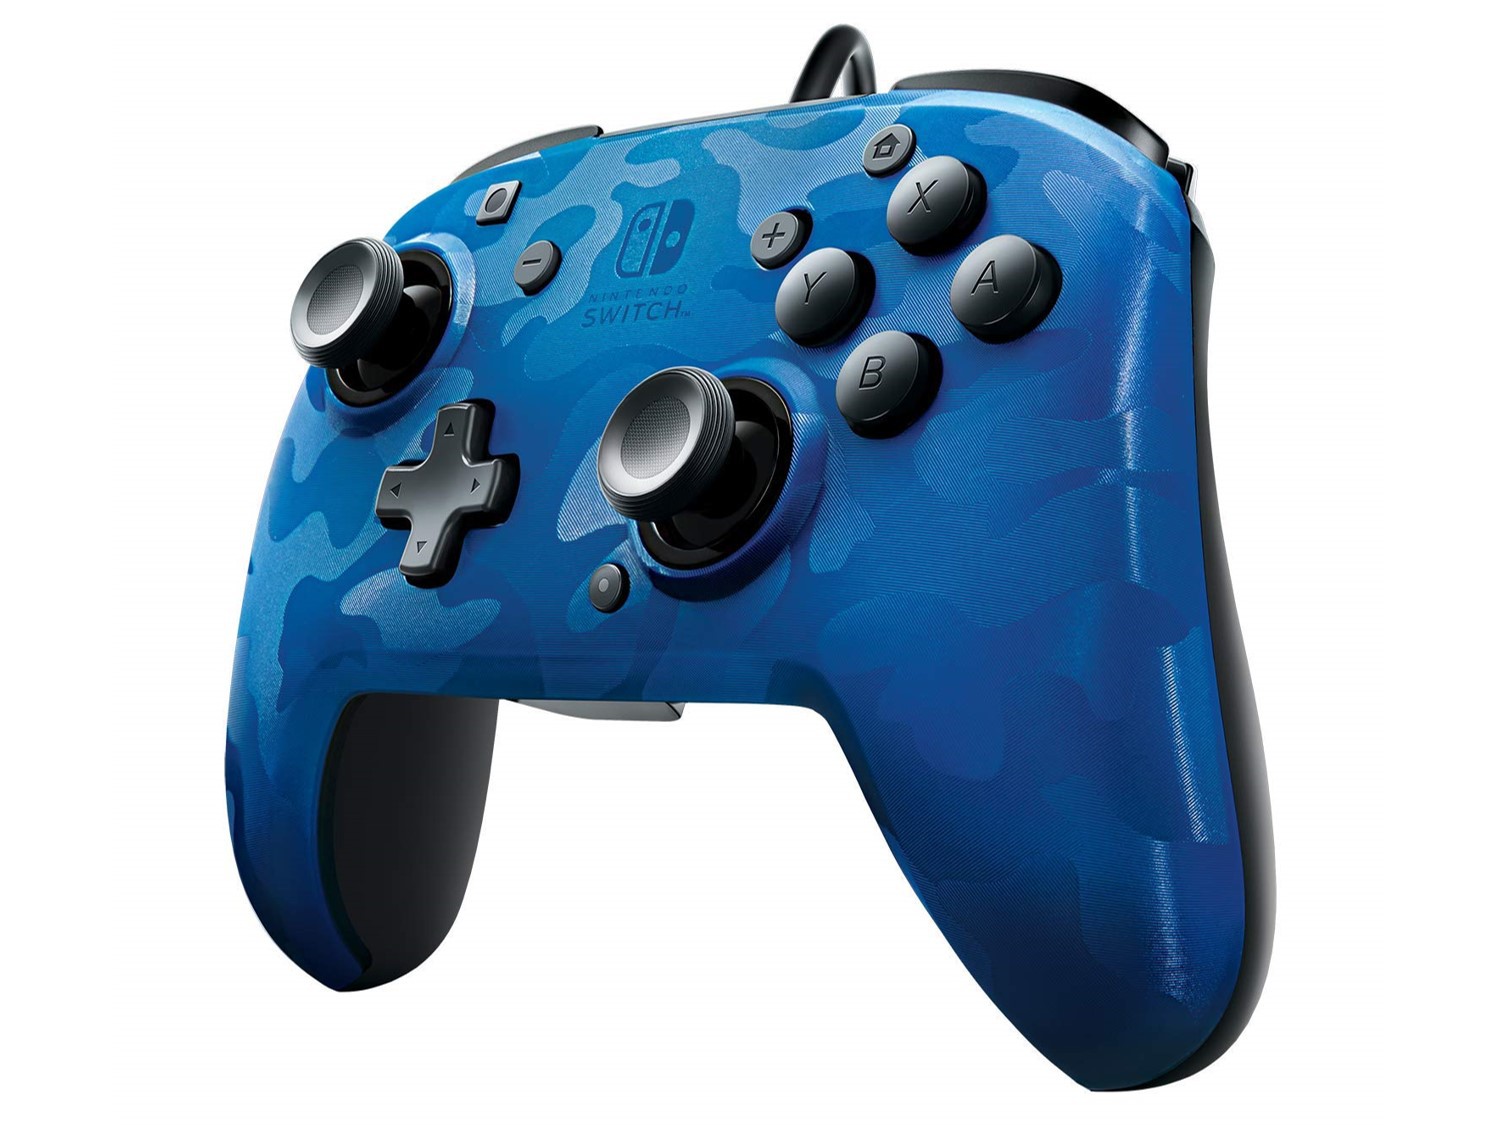 PDP Nintendo Switch Faceoff Deluxe Gaming Controller - Blue Camo - Nintendo Switch Hardware